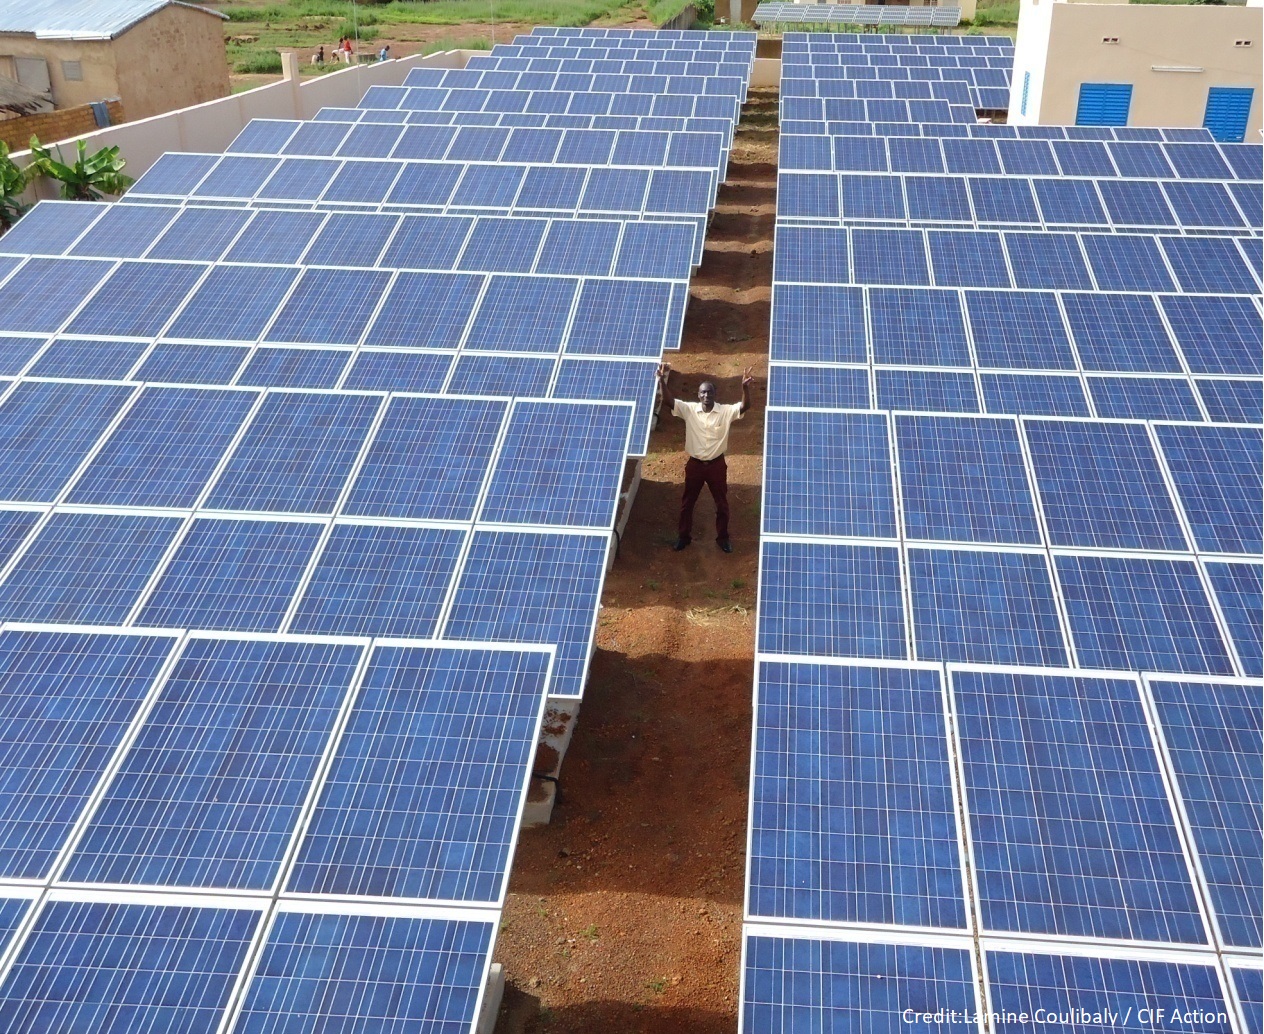 The Road to 100 % Renewable Energies (RE) in Tanzania